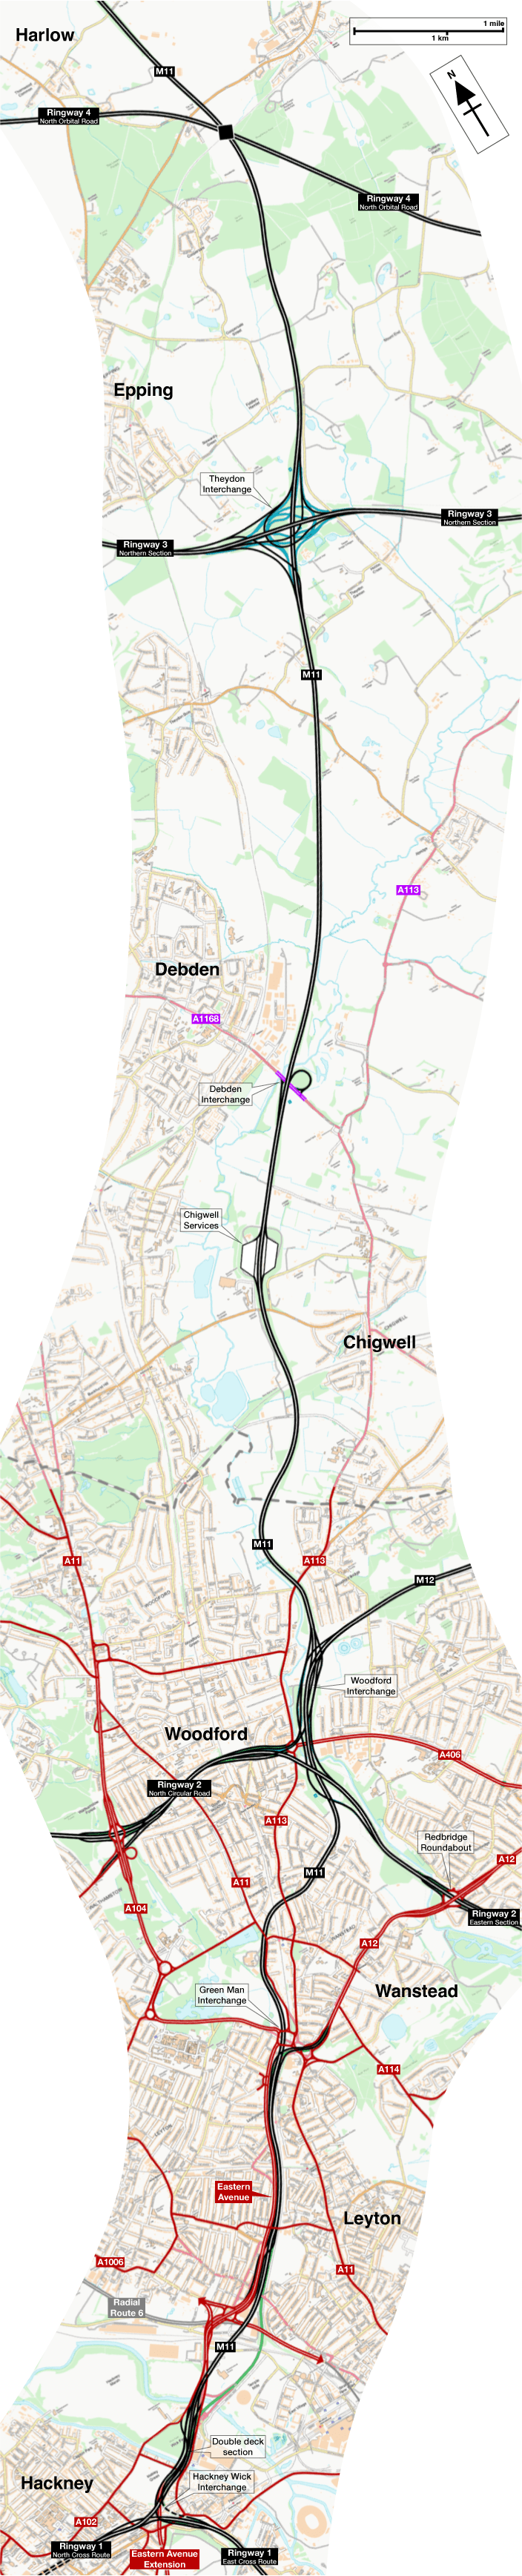 Map of the M11